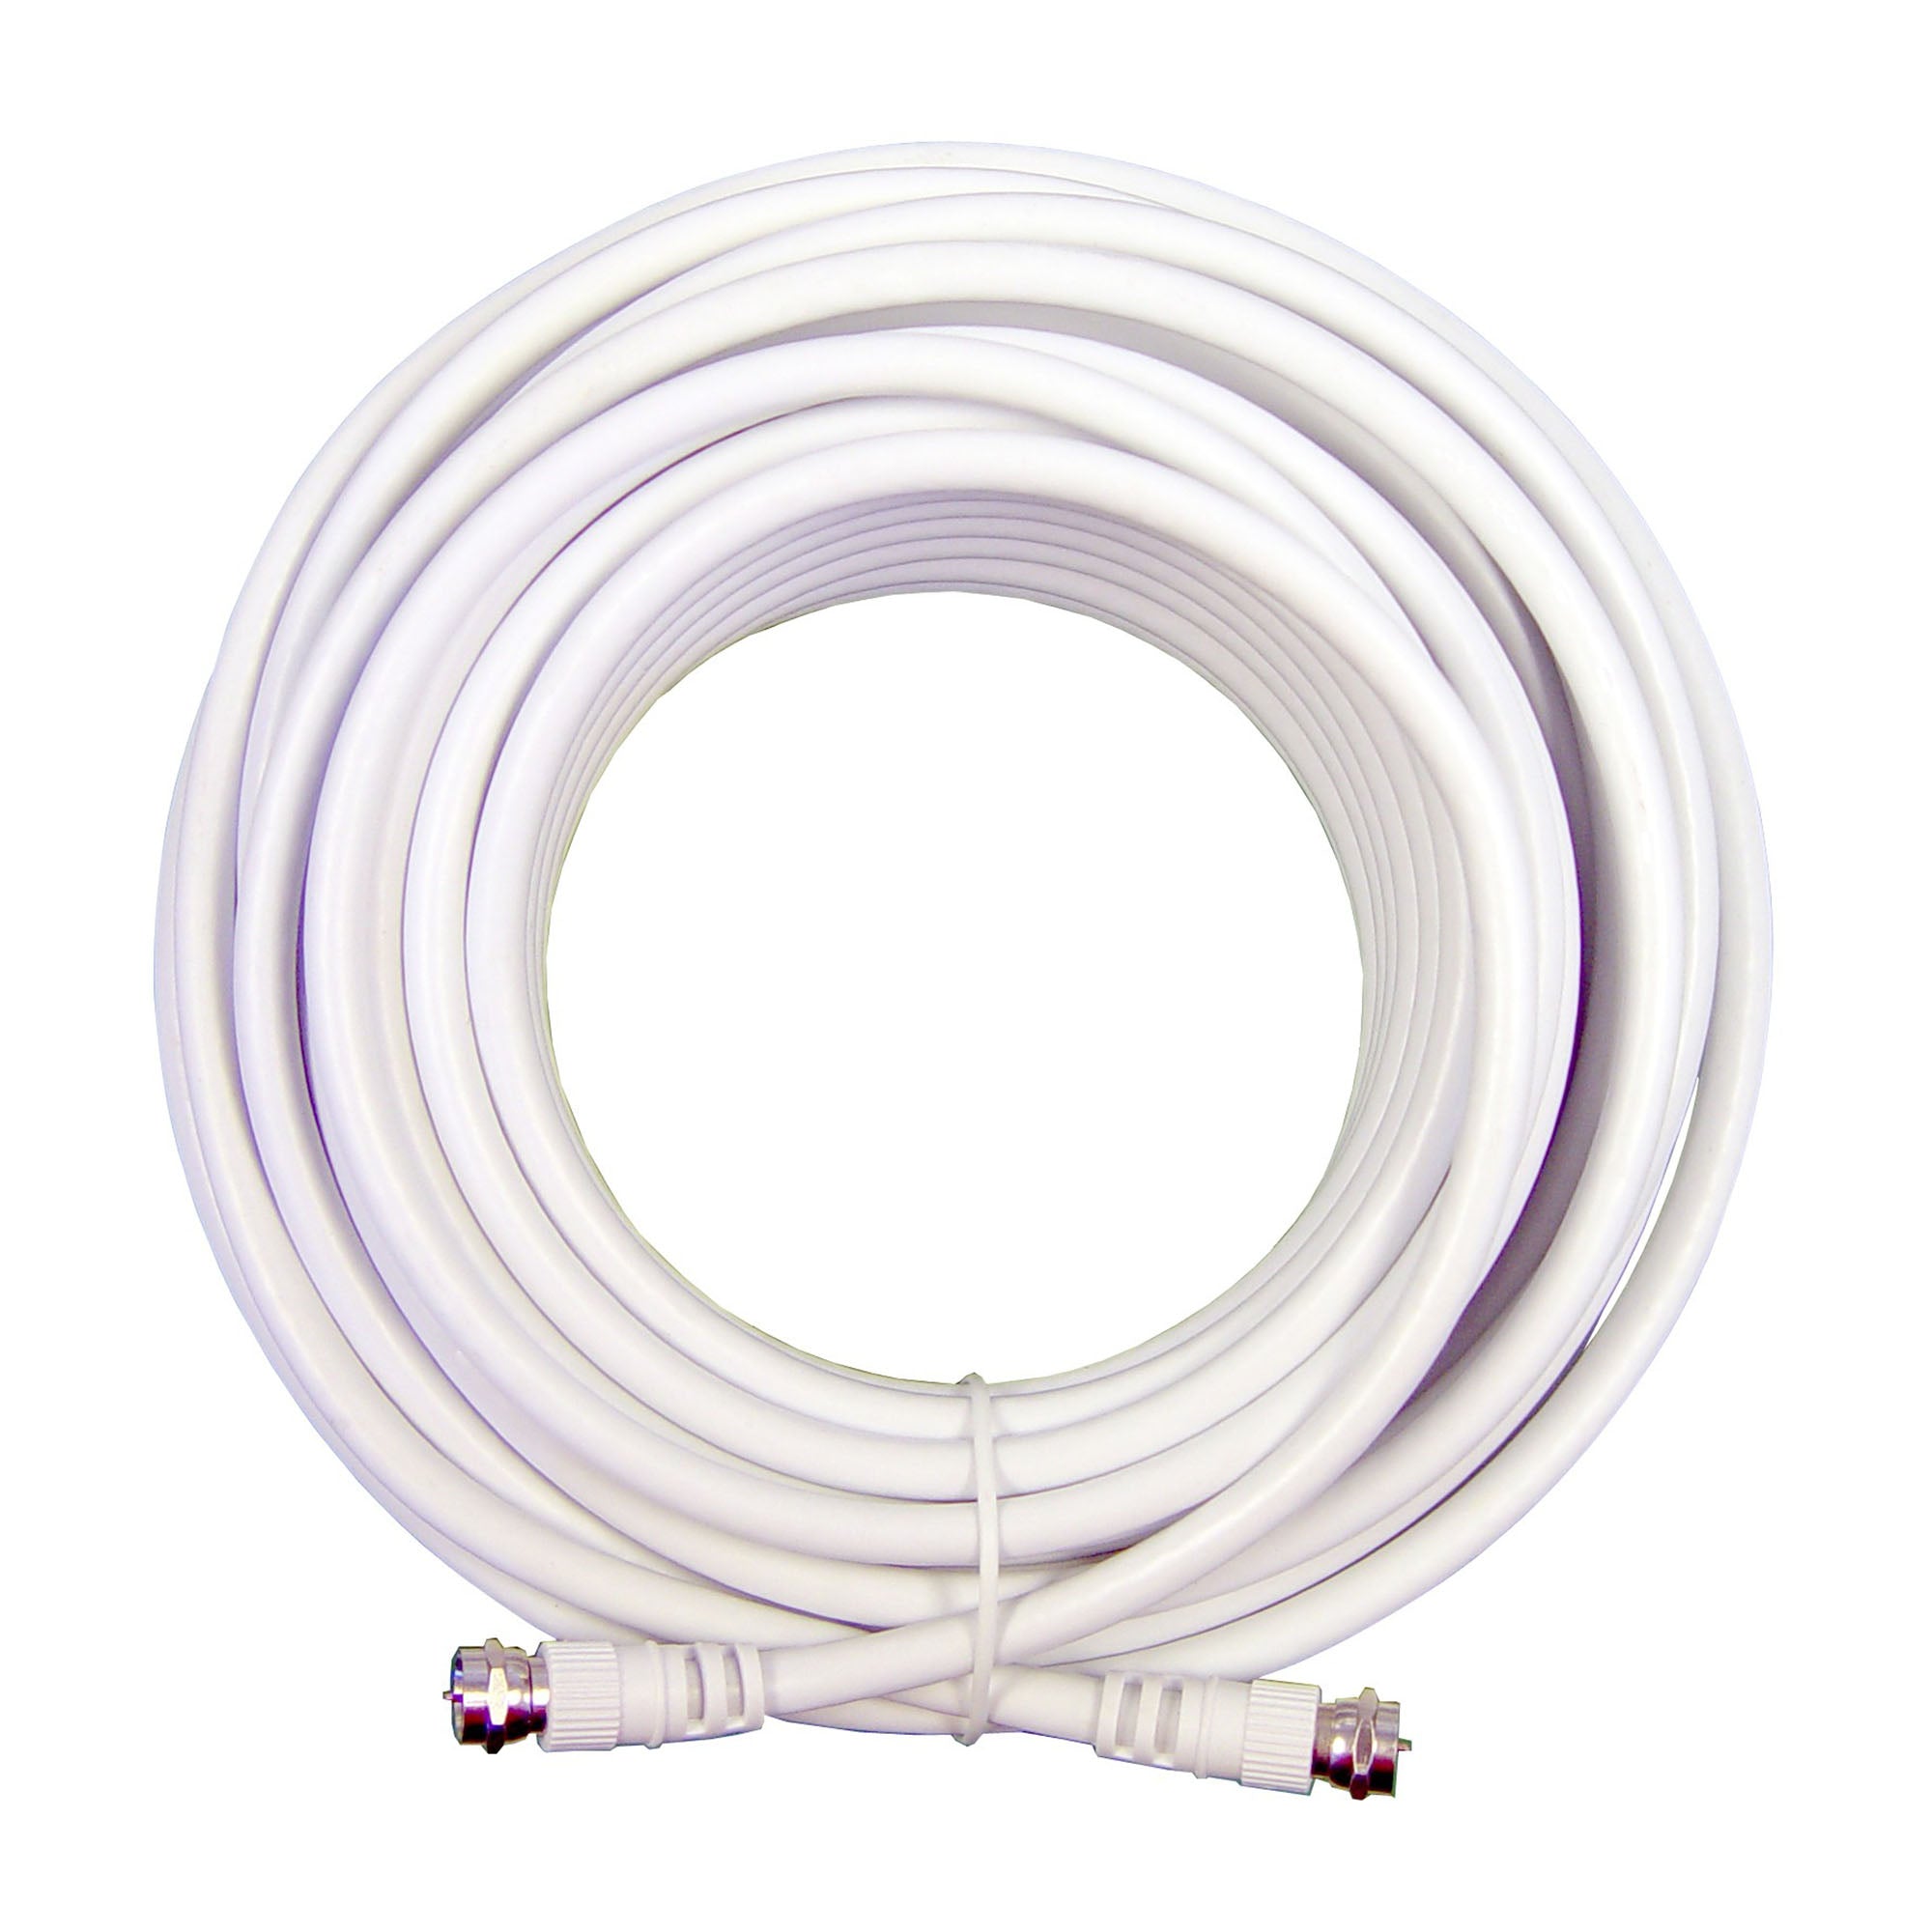 Wilson Cable 50 ft. white RG6 low loss coax cable